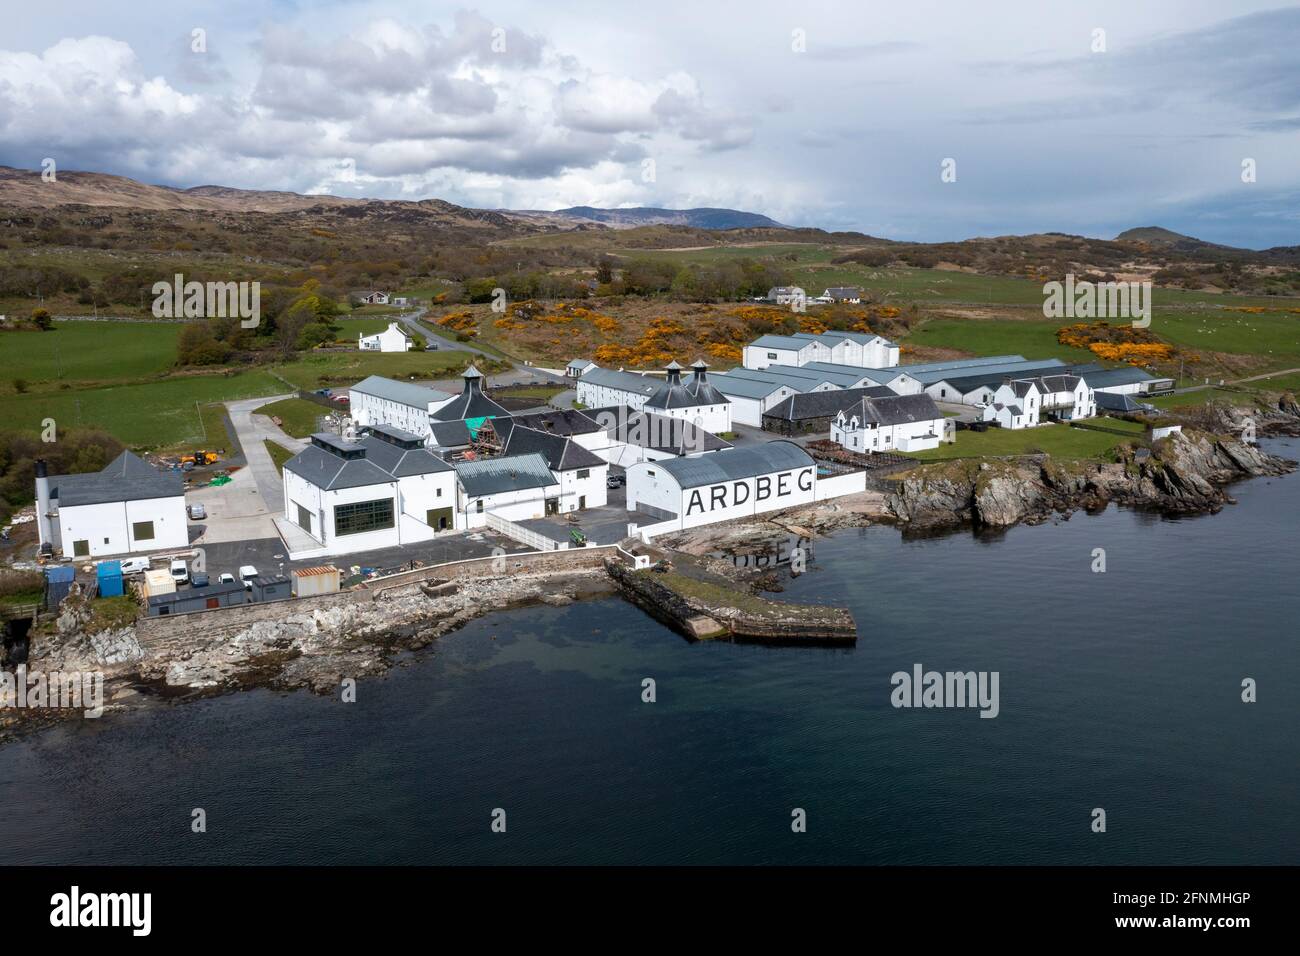 Aerial view of the Ardbeg Distillery, Islay, The distillery is owned by Louis Vuitton Moët Hennessy, and produces a heavily peated Islay whisky. Stock Photo